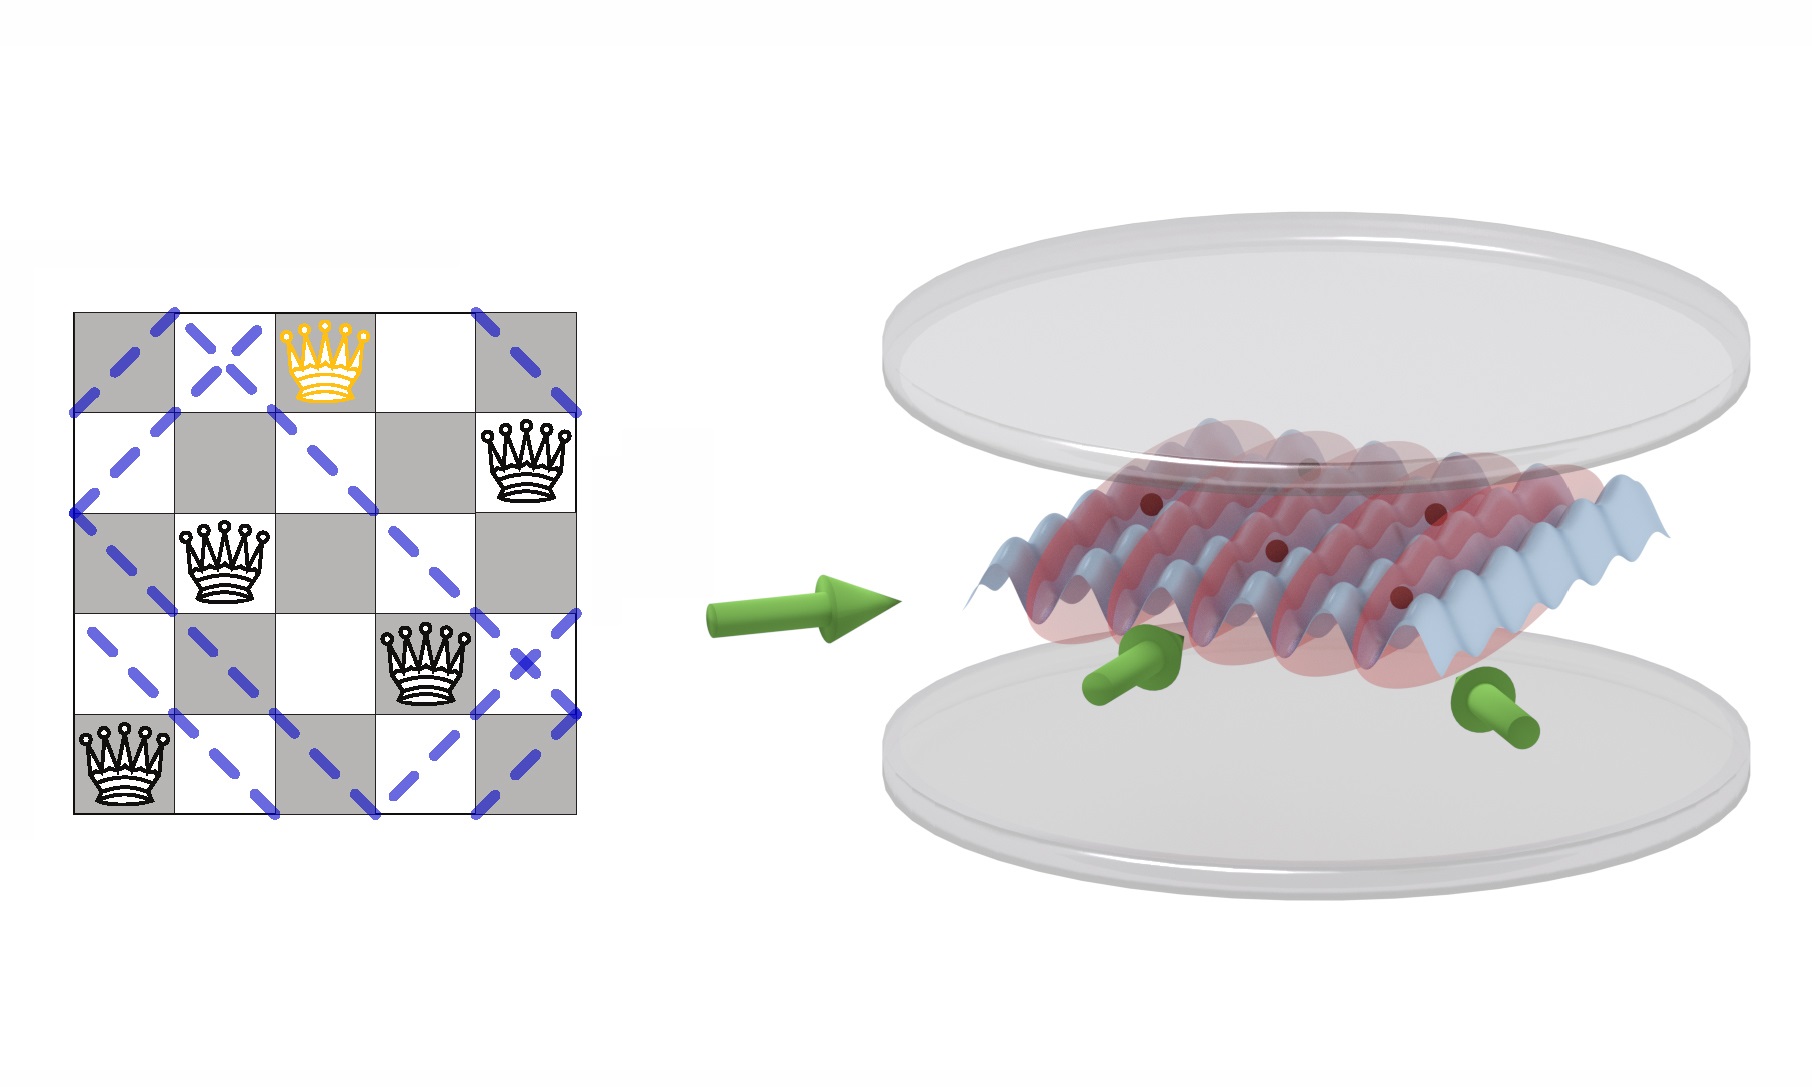 On a quantum chessboard the queens puzzle may be solved comparatively easily